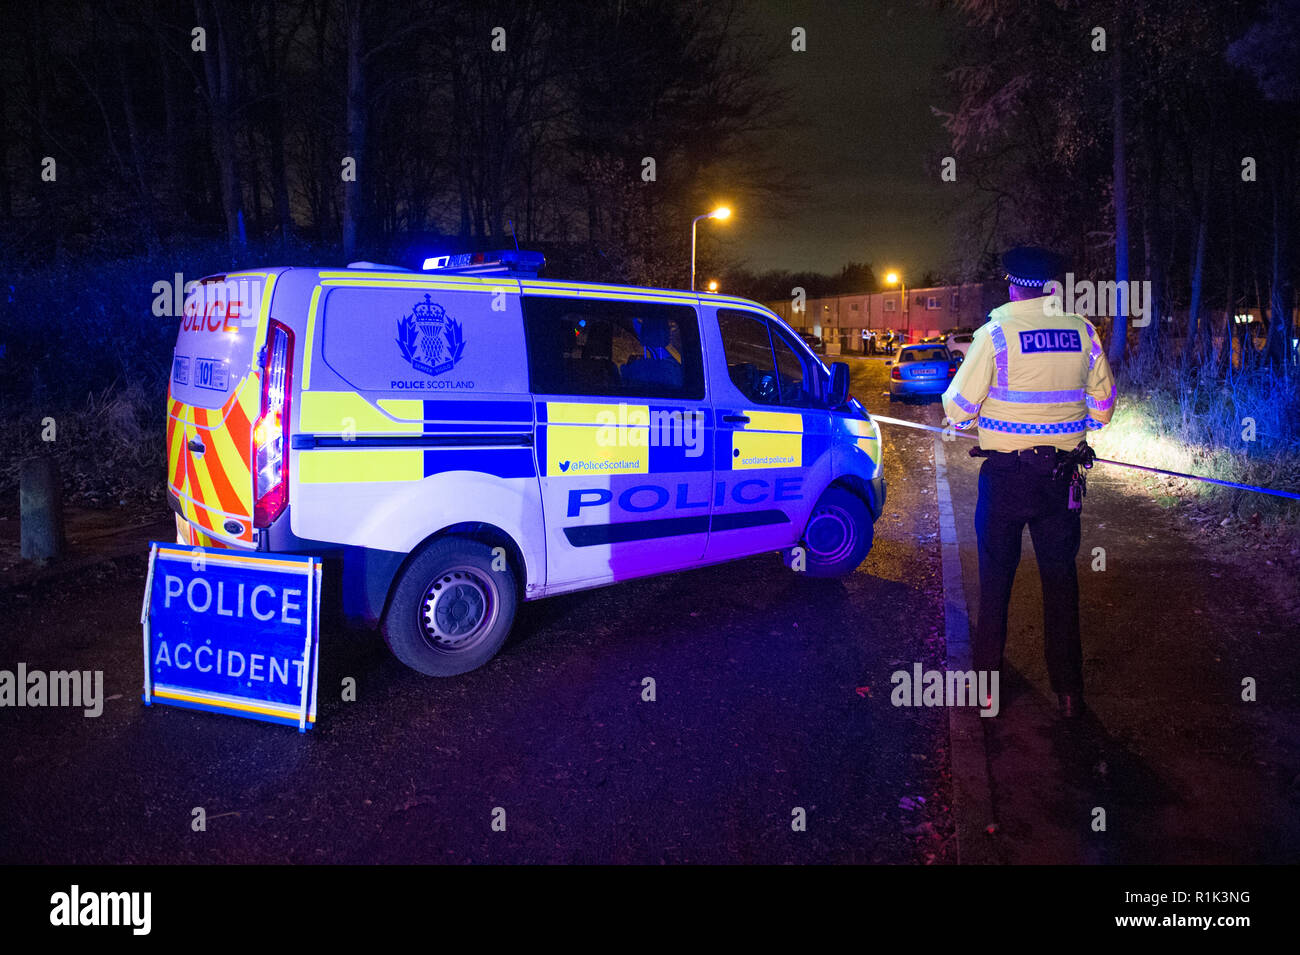 Cumbernauld, UK. 13th Nov, 2018. Police Incident of a suspected attack in the Seafar area of Cumbernauld at 8pm. Police have cordoned off the area with tape and are investigating but not giving any details out. One person has been taken away in an ambulance with the blue lights and siren on.  A car remains on the scene along with a heavily wooded area cordoned off for investigation. Around 5 officers, 2 police units and an ambulance were in attendance.  Credit: Colin Fisher/Alamy Live News Stock Photo